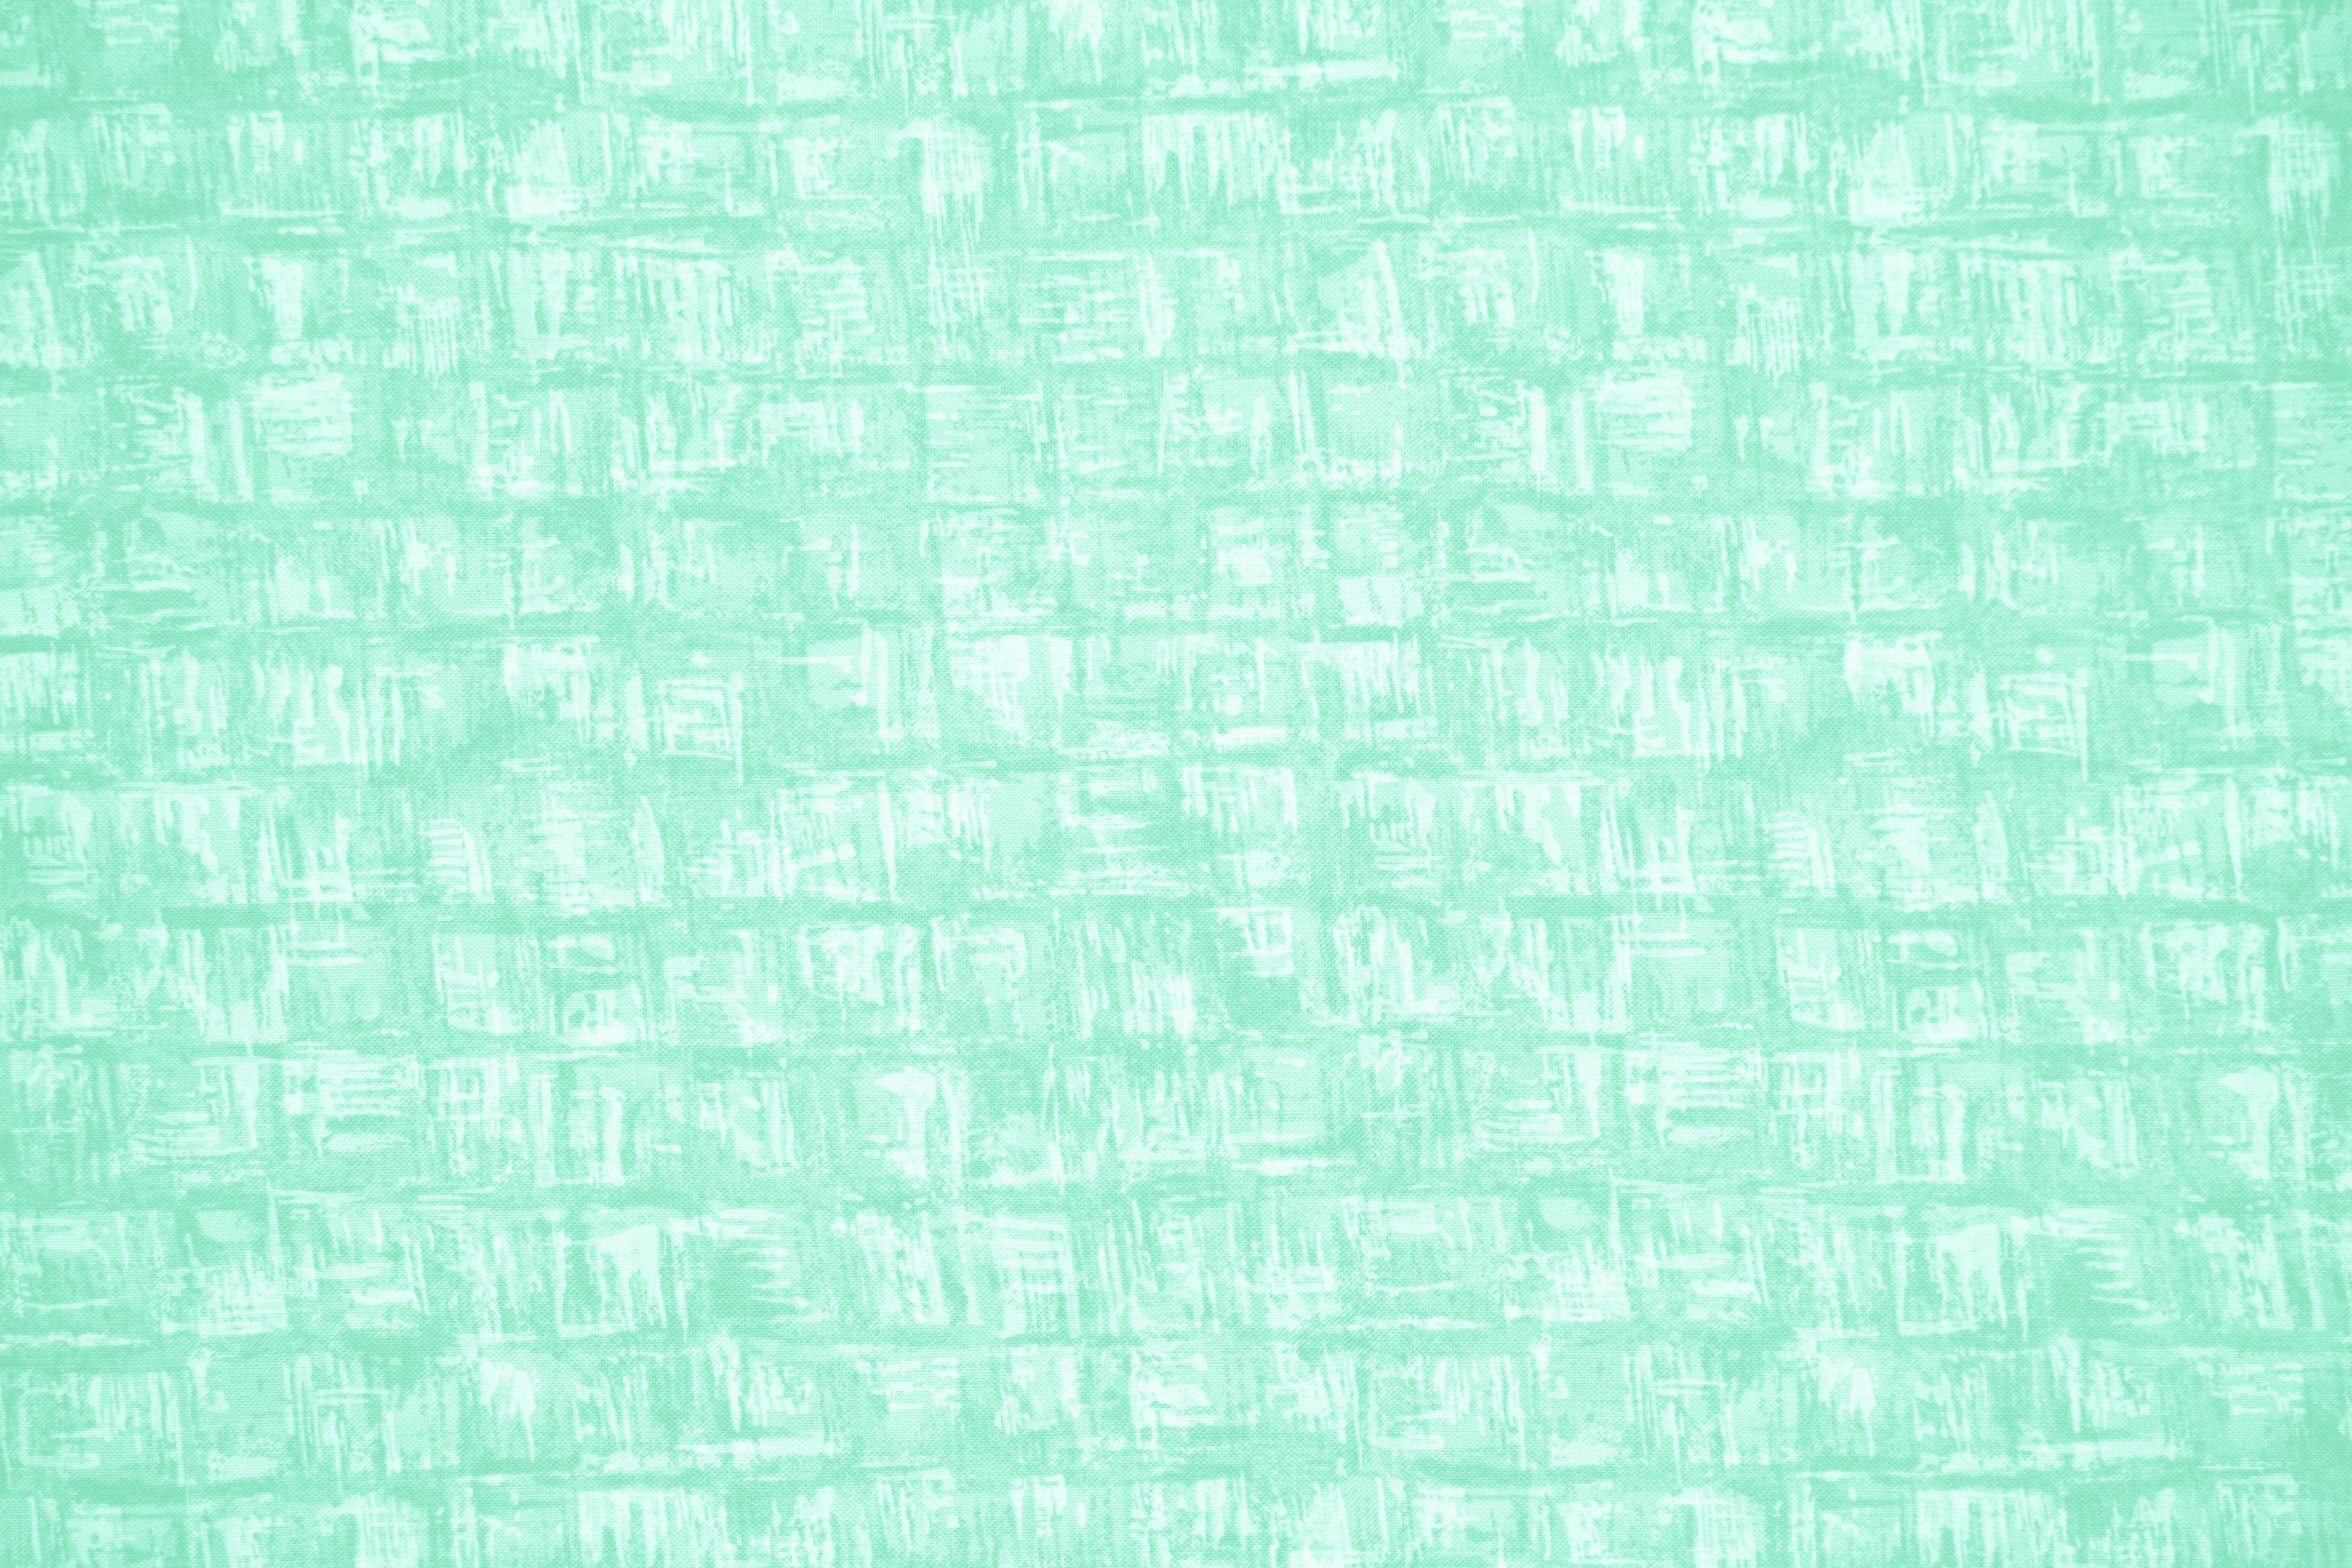 Mint green network web texture seamless pattern Great for abstract modern  wallpaper backgrounds invitations packaging design projects Surface  pattern design 素材庫向量圖 Adobe Stock